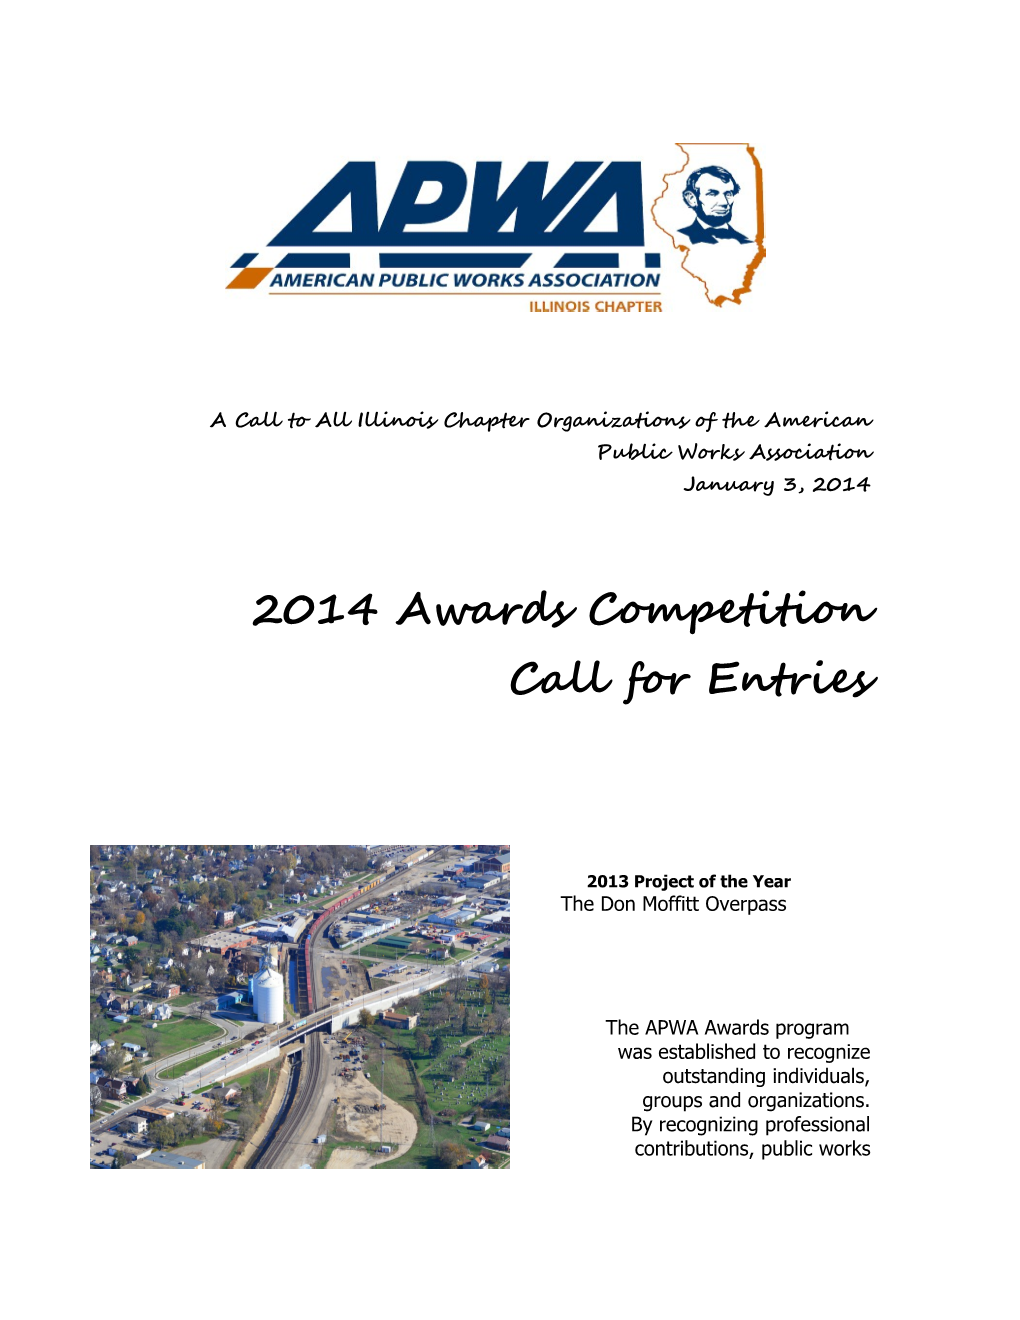 A Call to All Illinois Chapter Organizations of the American Public Works Association